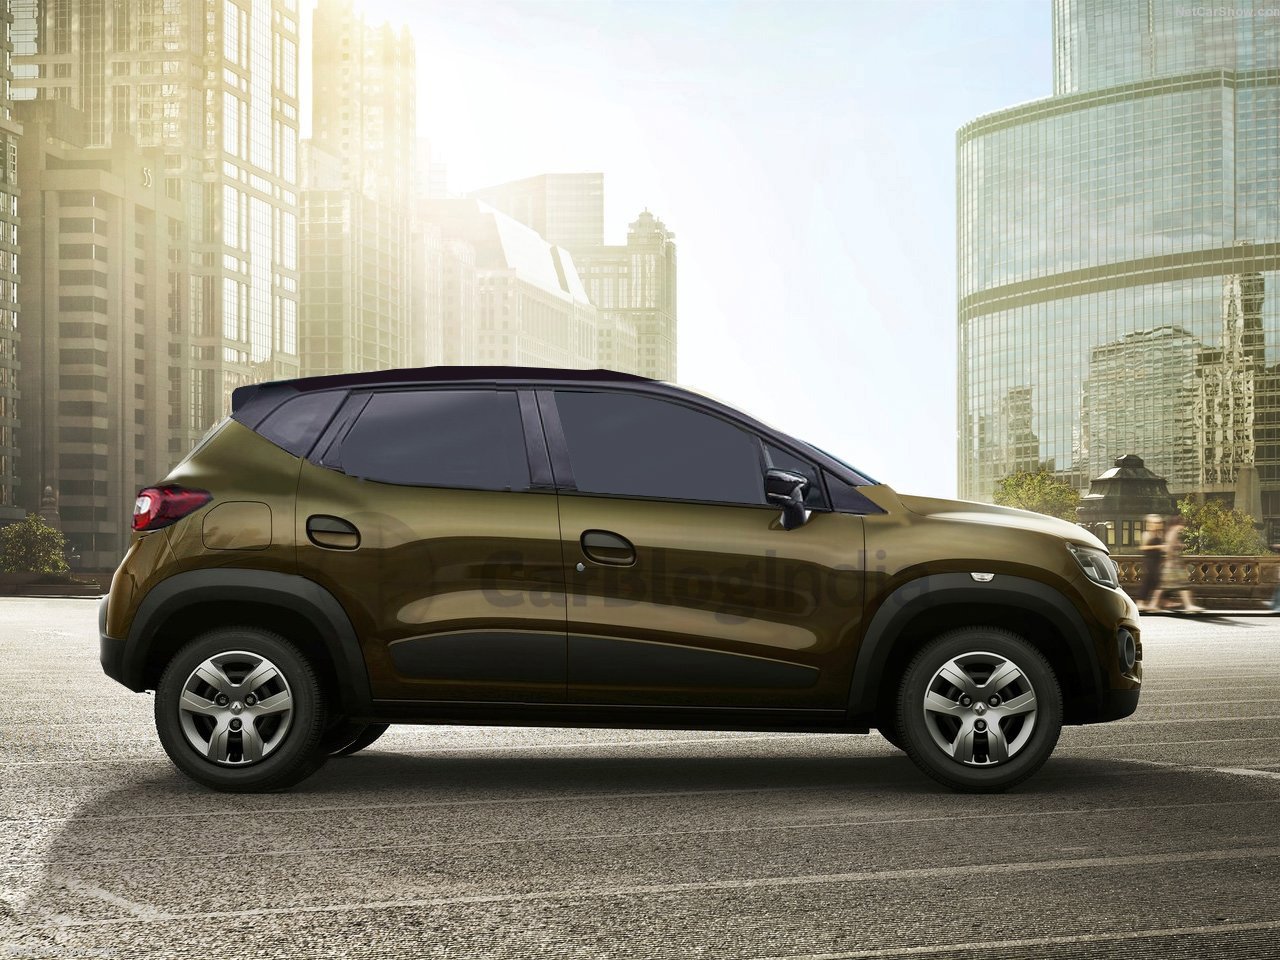 Renault Kwid MPV Price, Launch Date, Specifications, Mileage, Interior